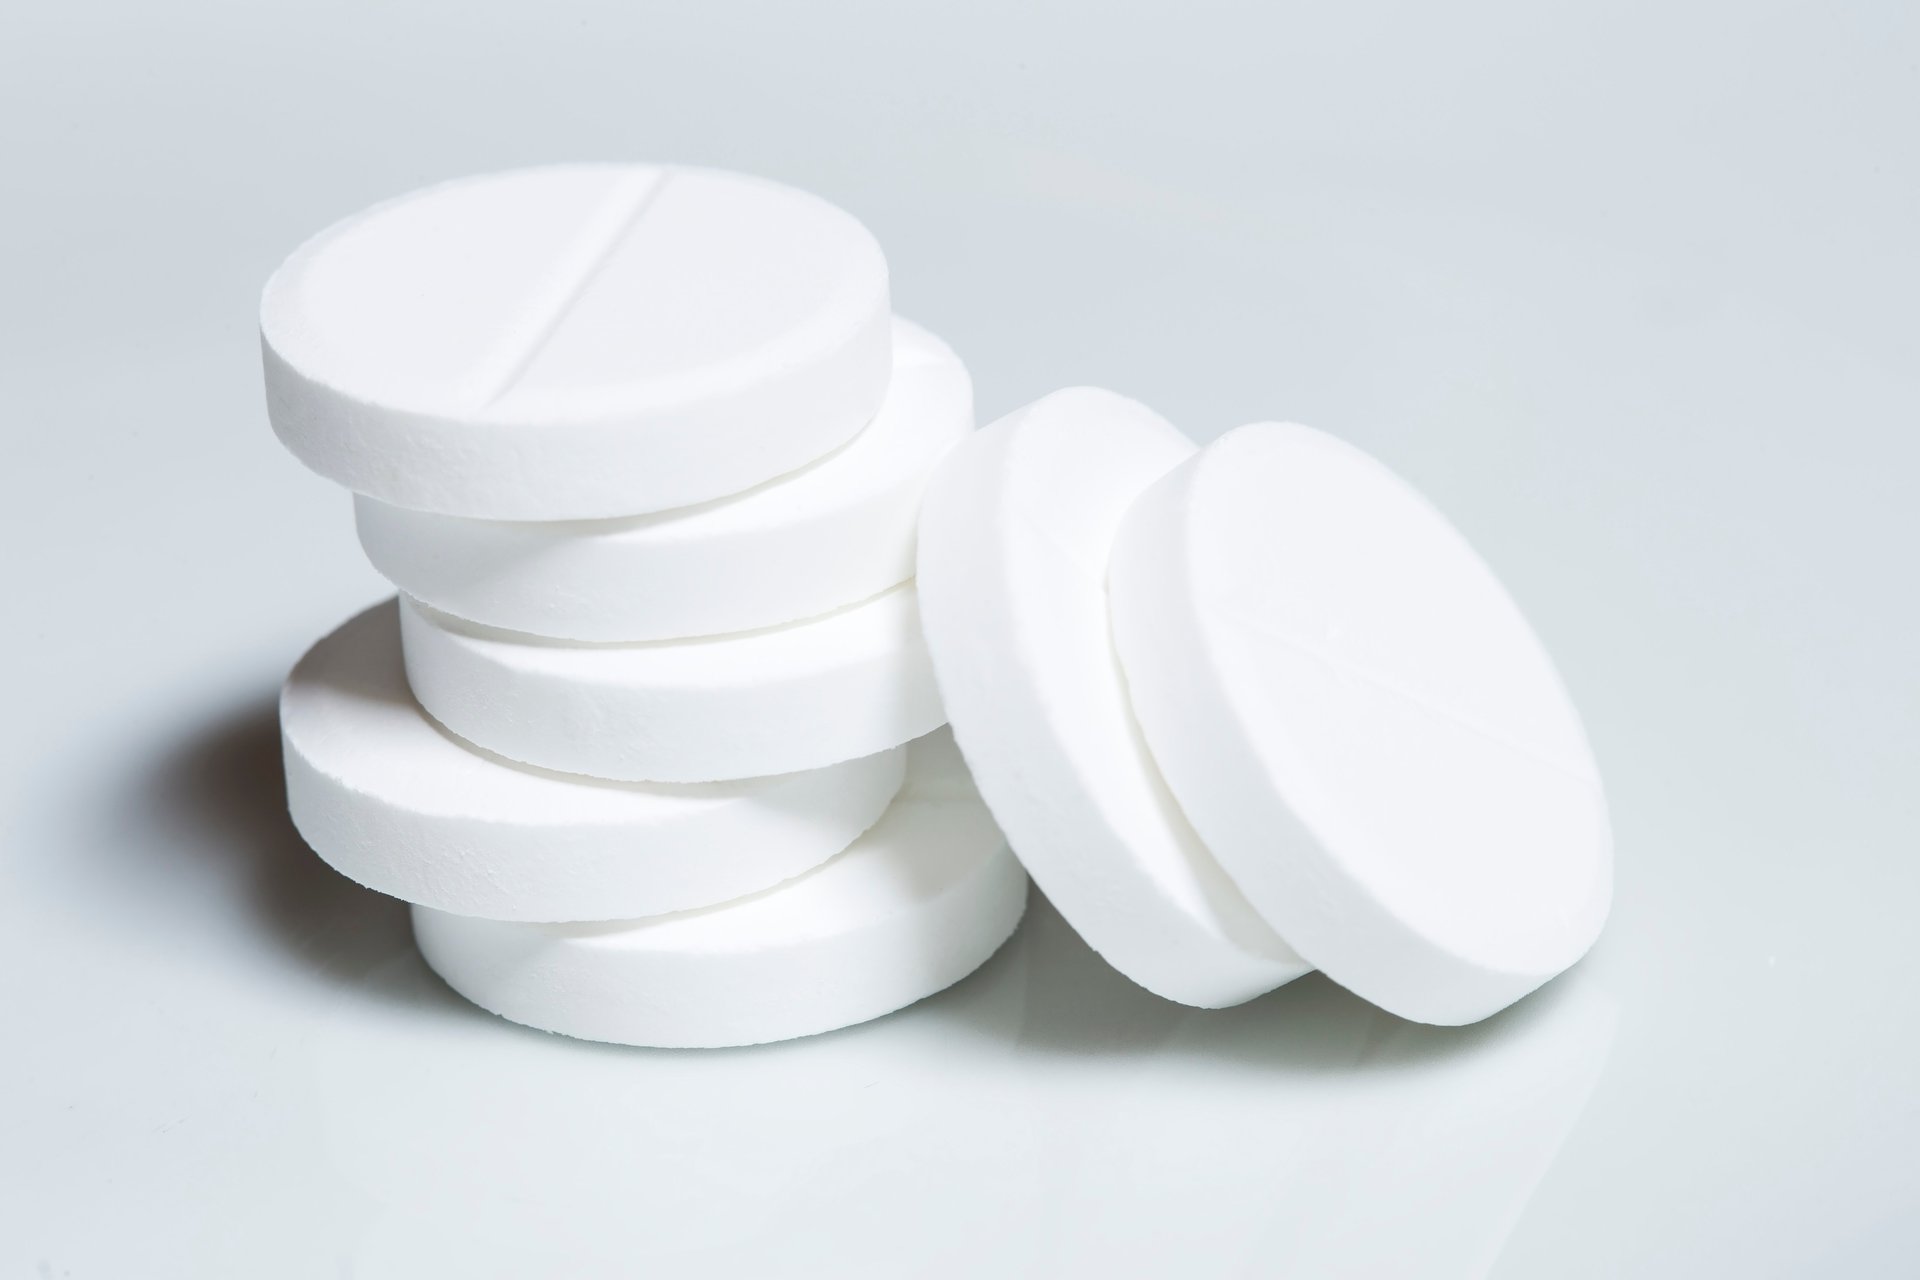 News Picture: Daily Baby Aspirin Raises Odds for Brain Bleeds, With No Lowering of Stroke Risk